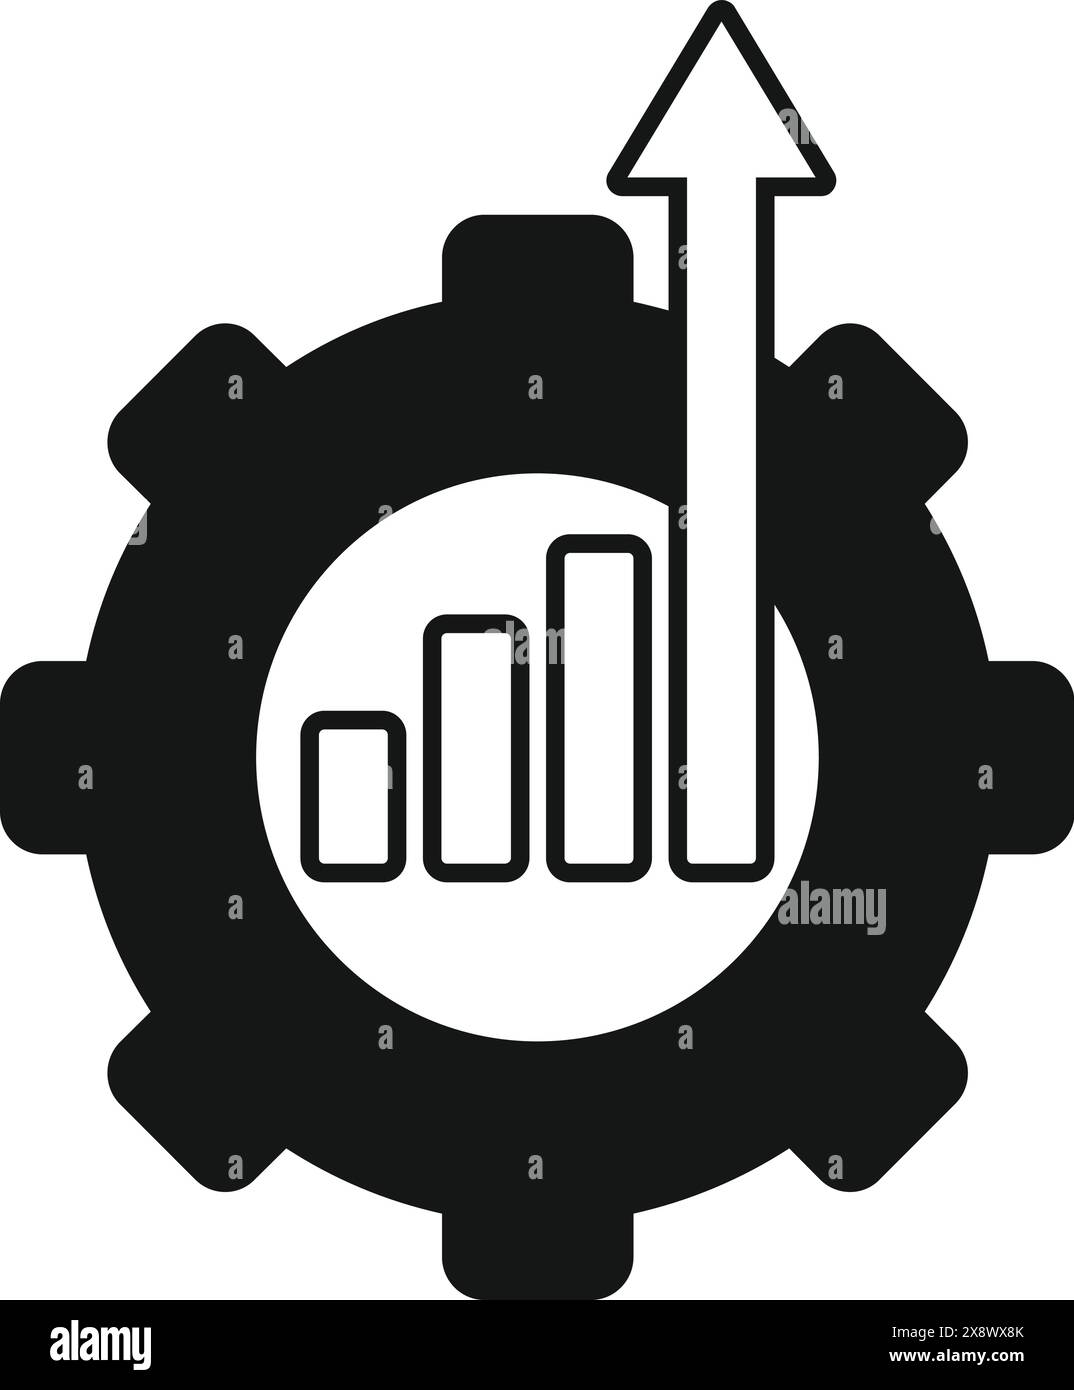 Black and white vector icon symbolizing business growth, productivity, and success with a gear and chart Stock Vector